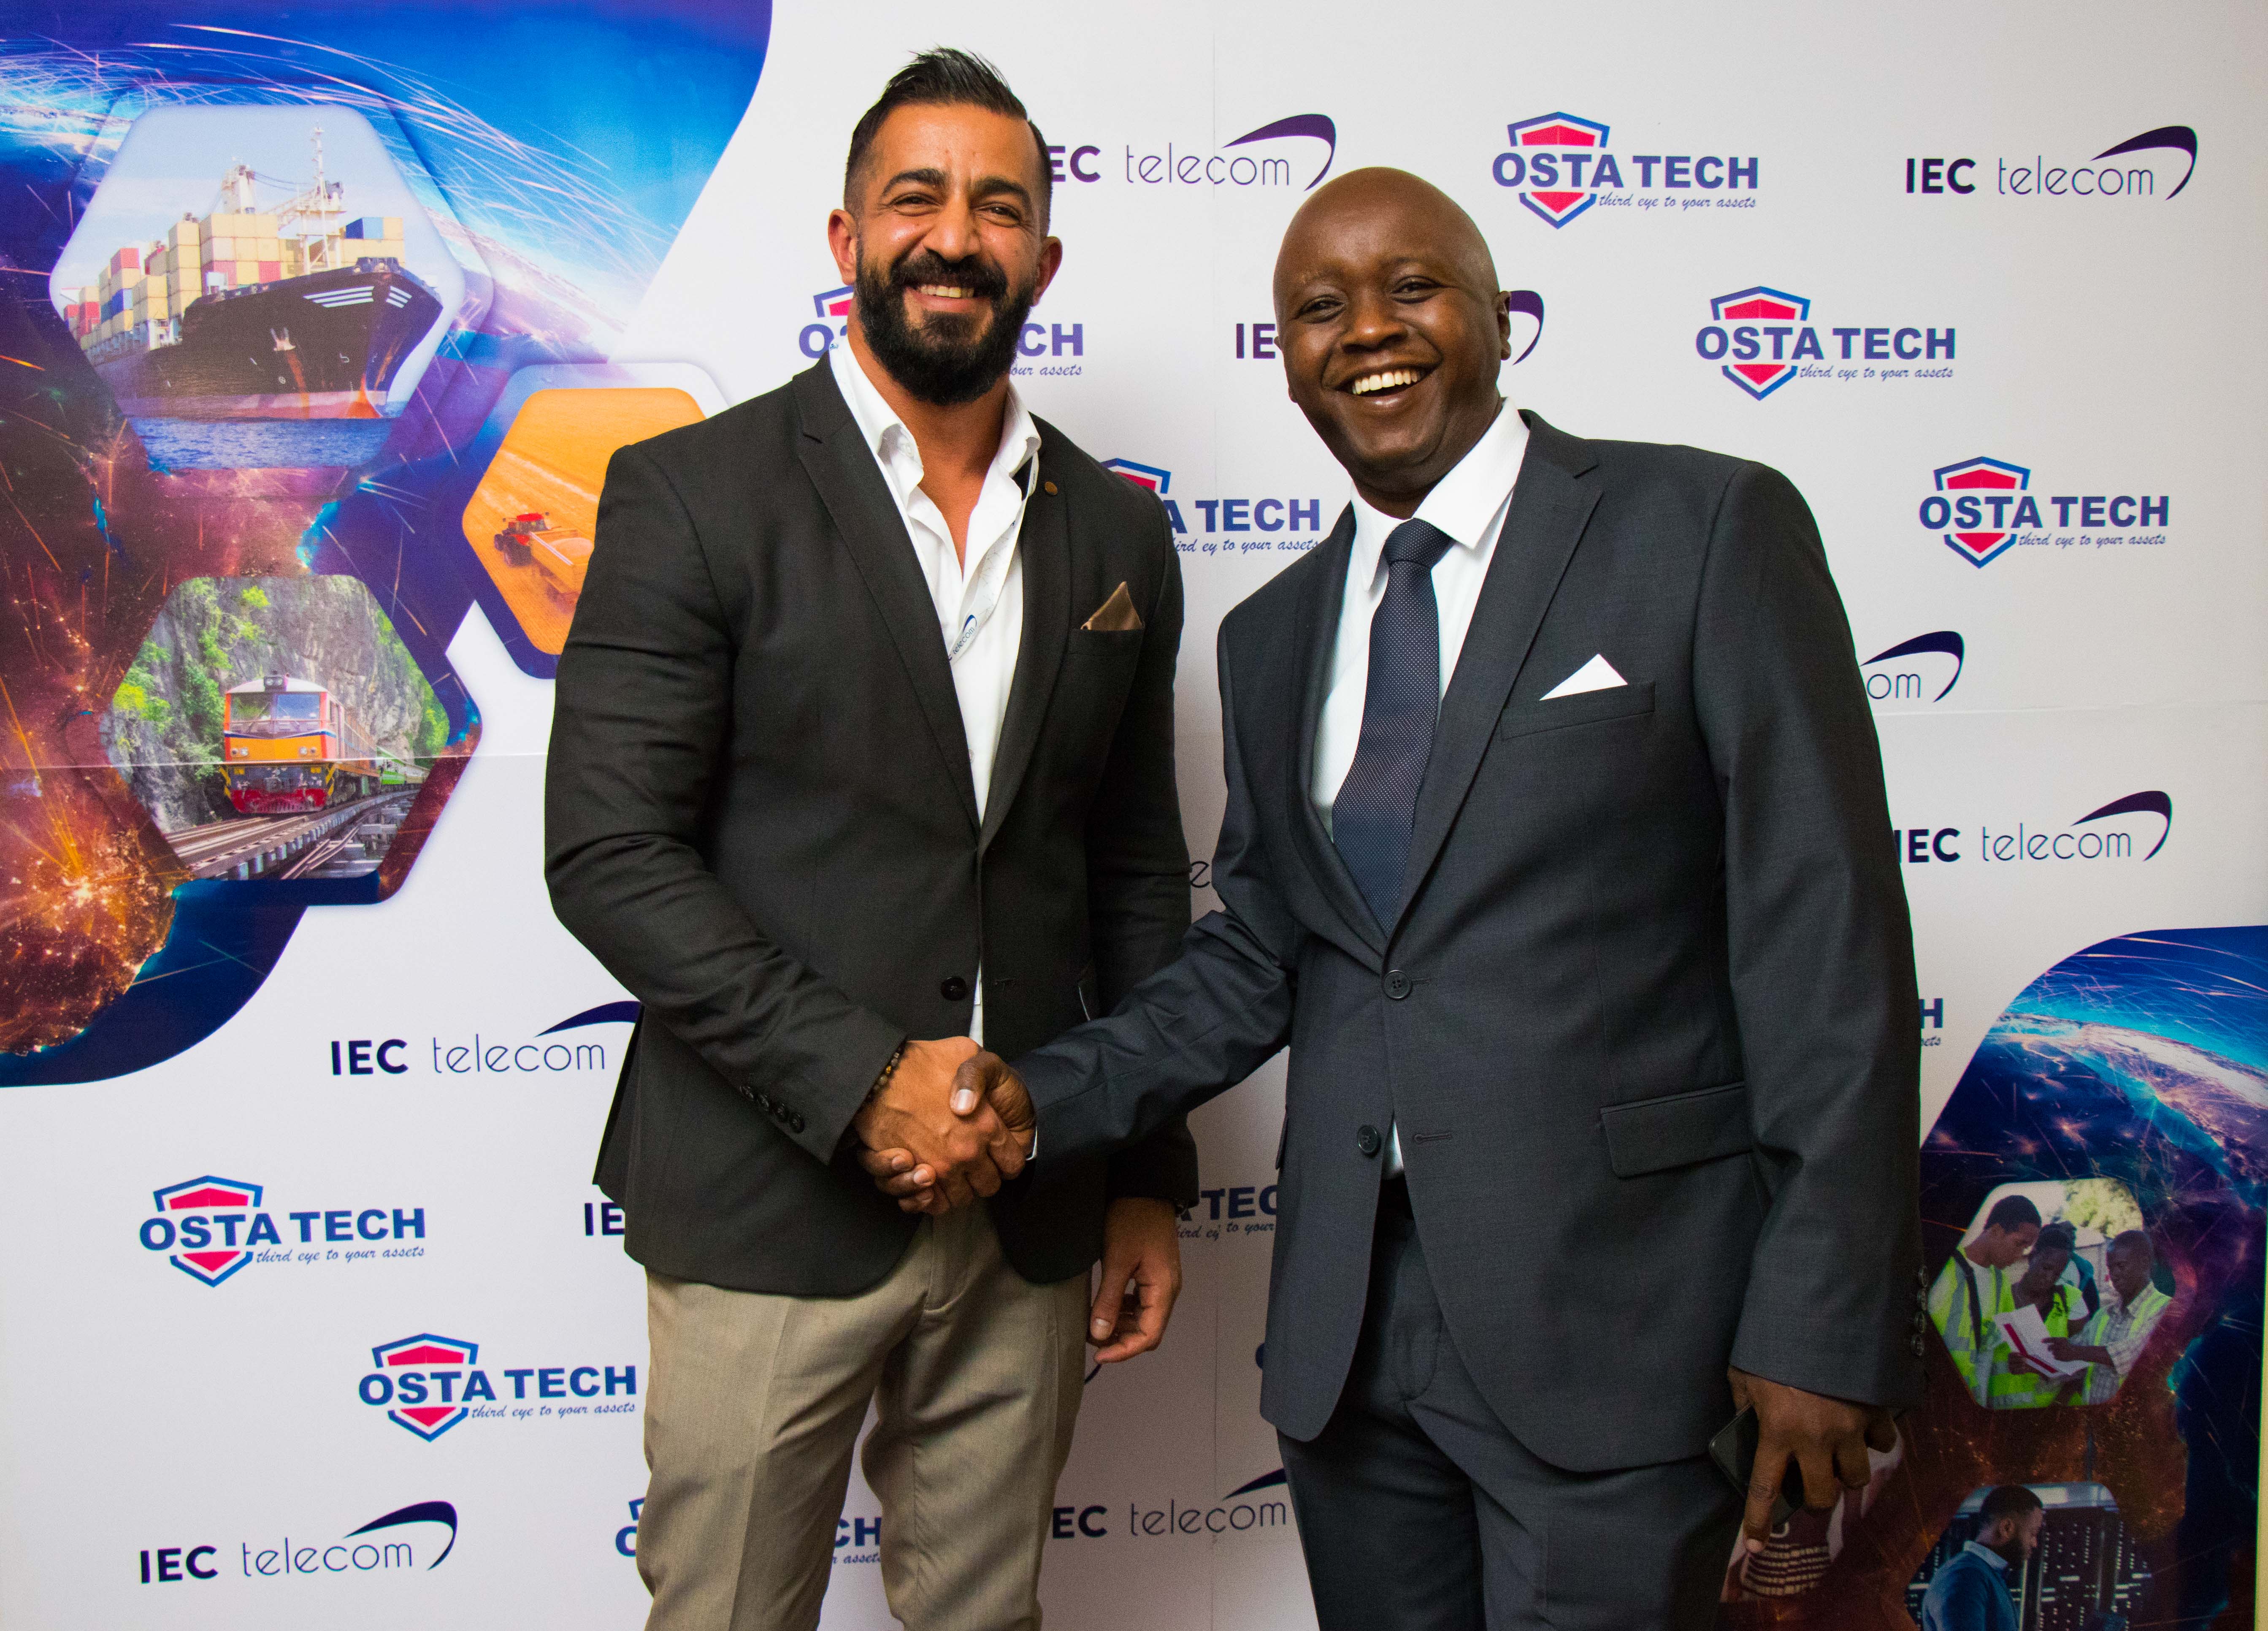 Ostatech Inks Partnership With IEC Telecom To Bring Internet Satellite Connectivity To Kenya